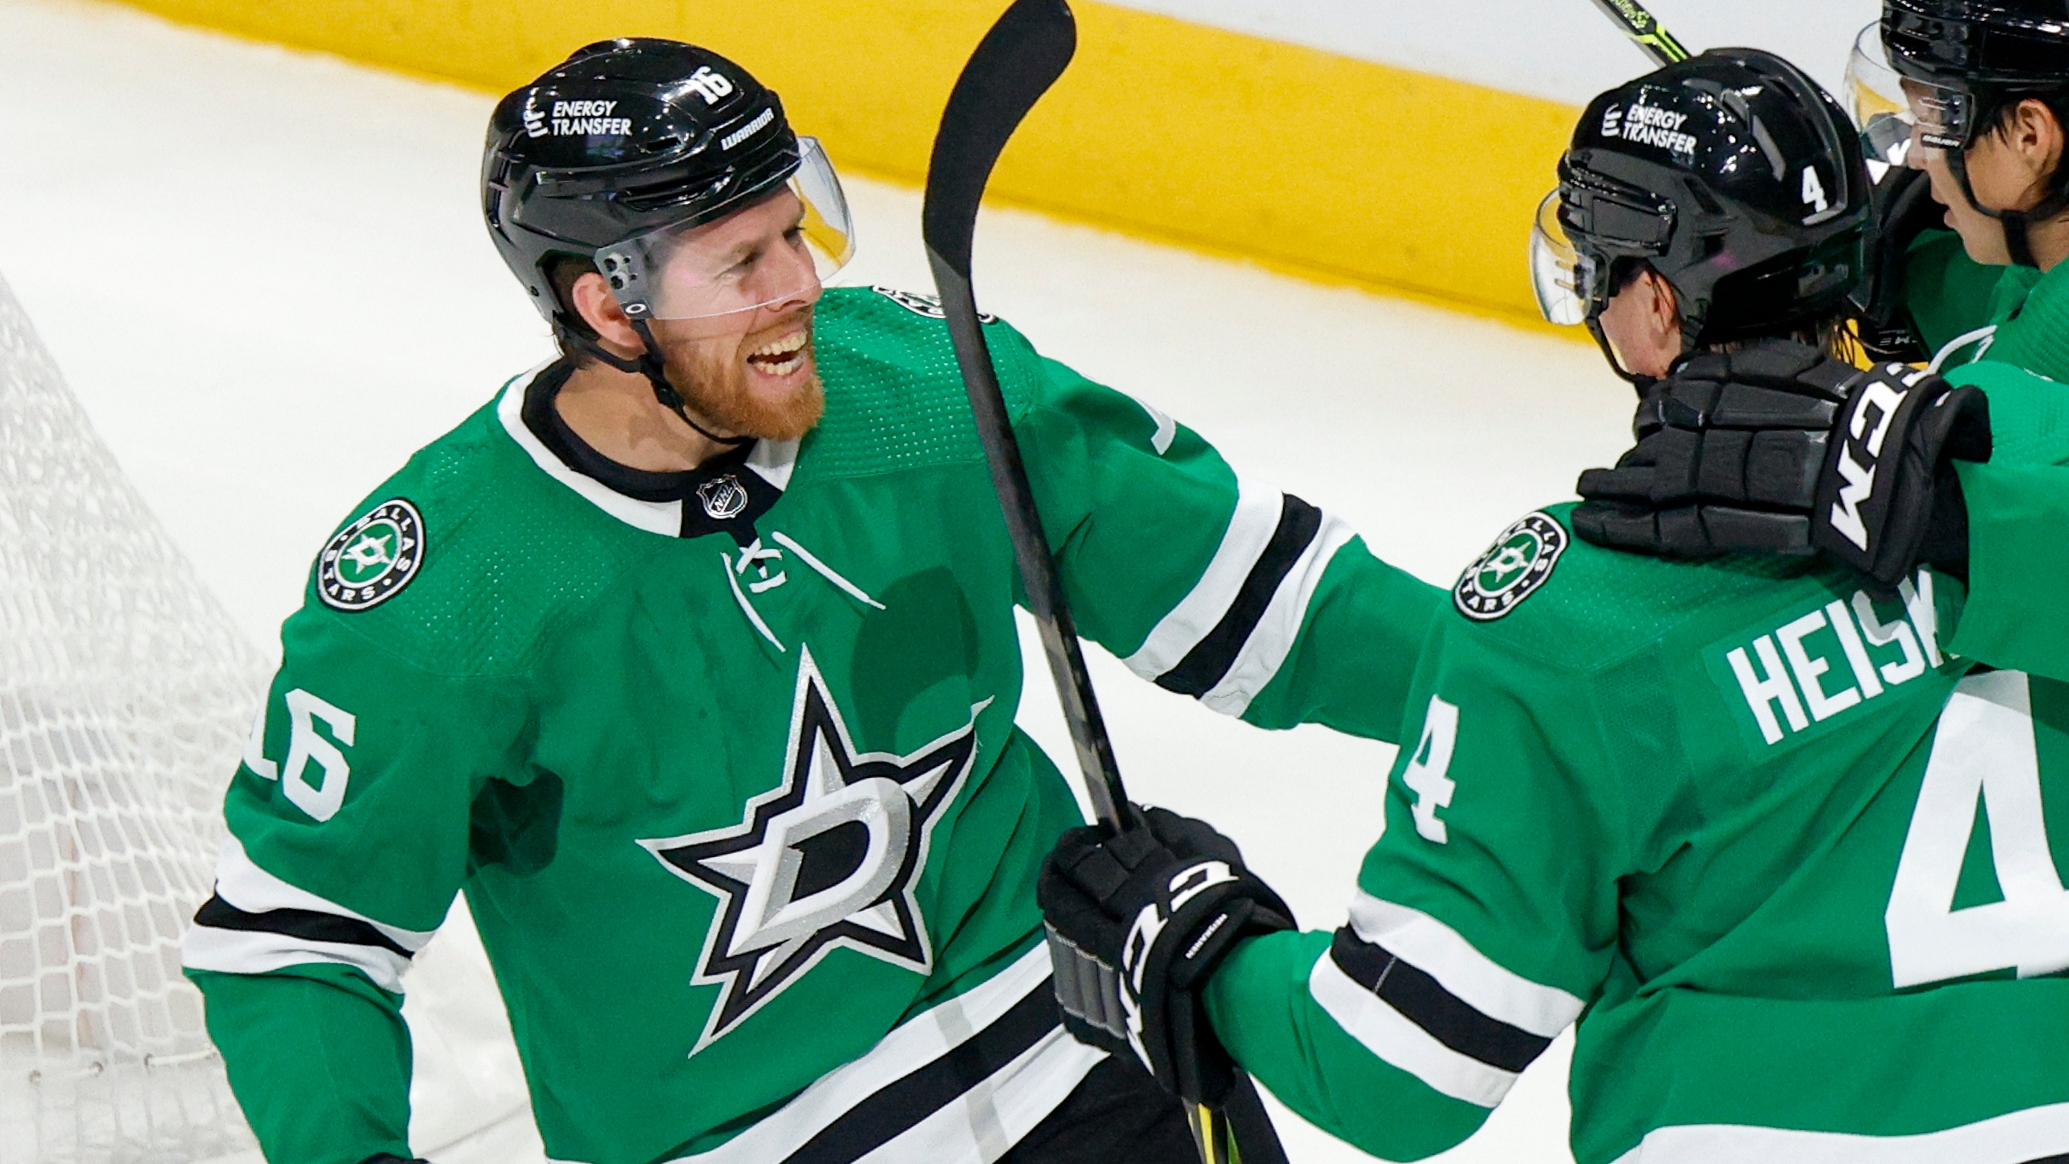 After a rough start to the season, Joe Pavelski is showing his value to the  Stars